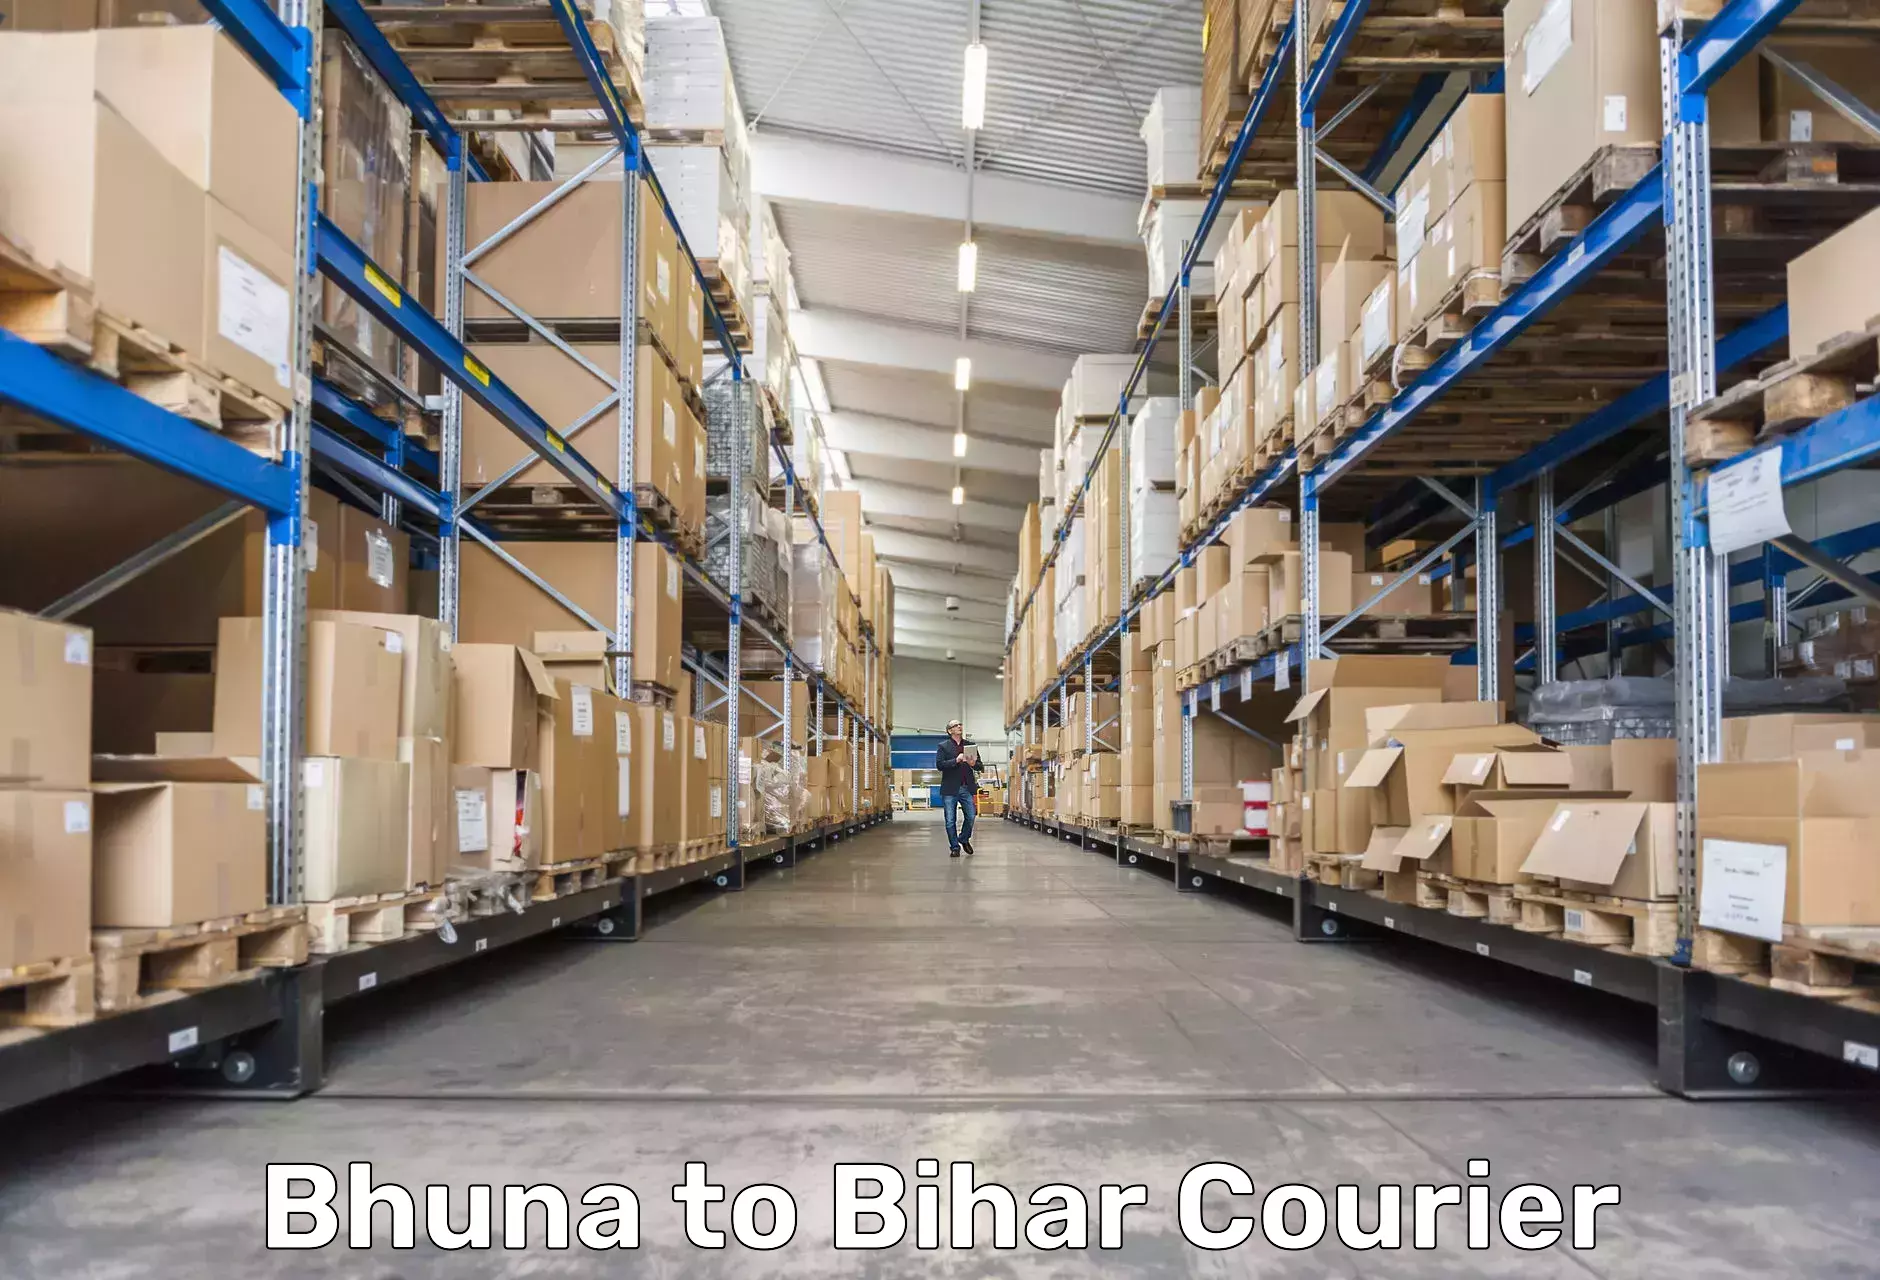 Fast shipping solutions Bhuna to Dinara